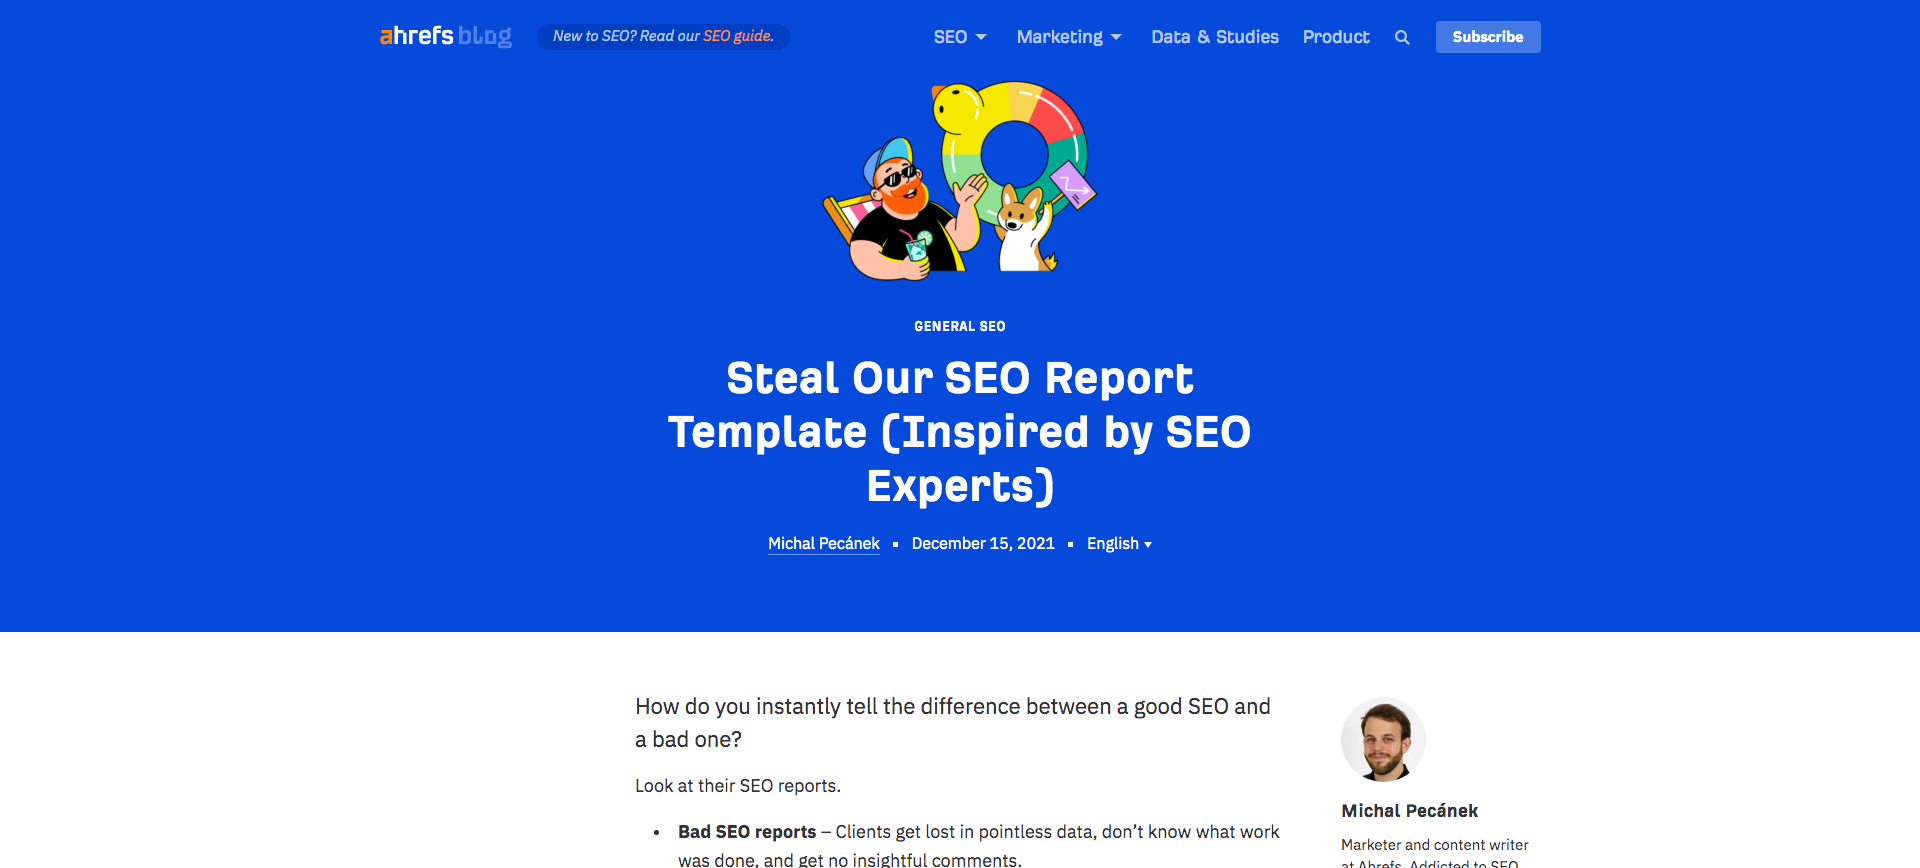 Steal our SEO Report